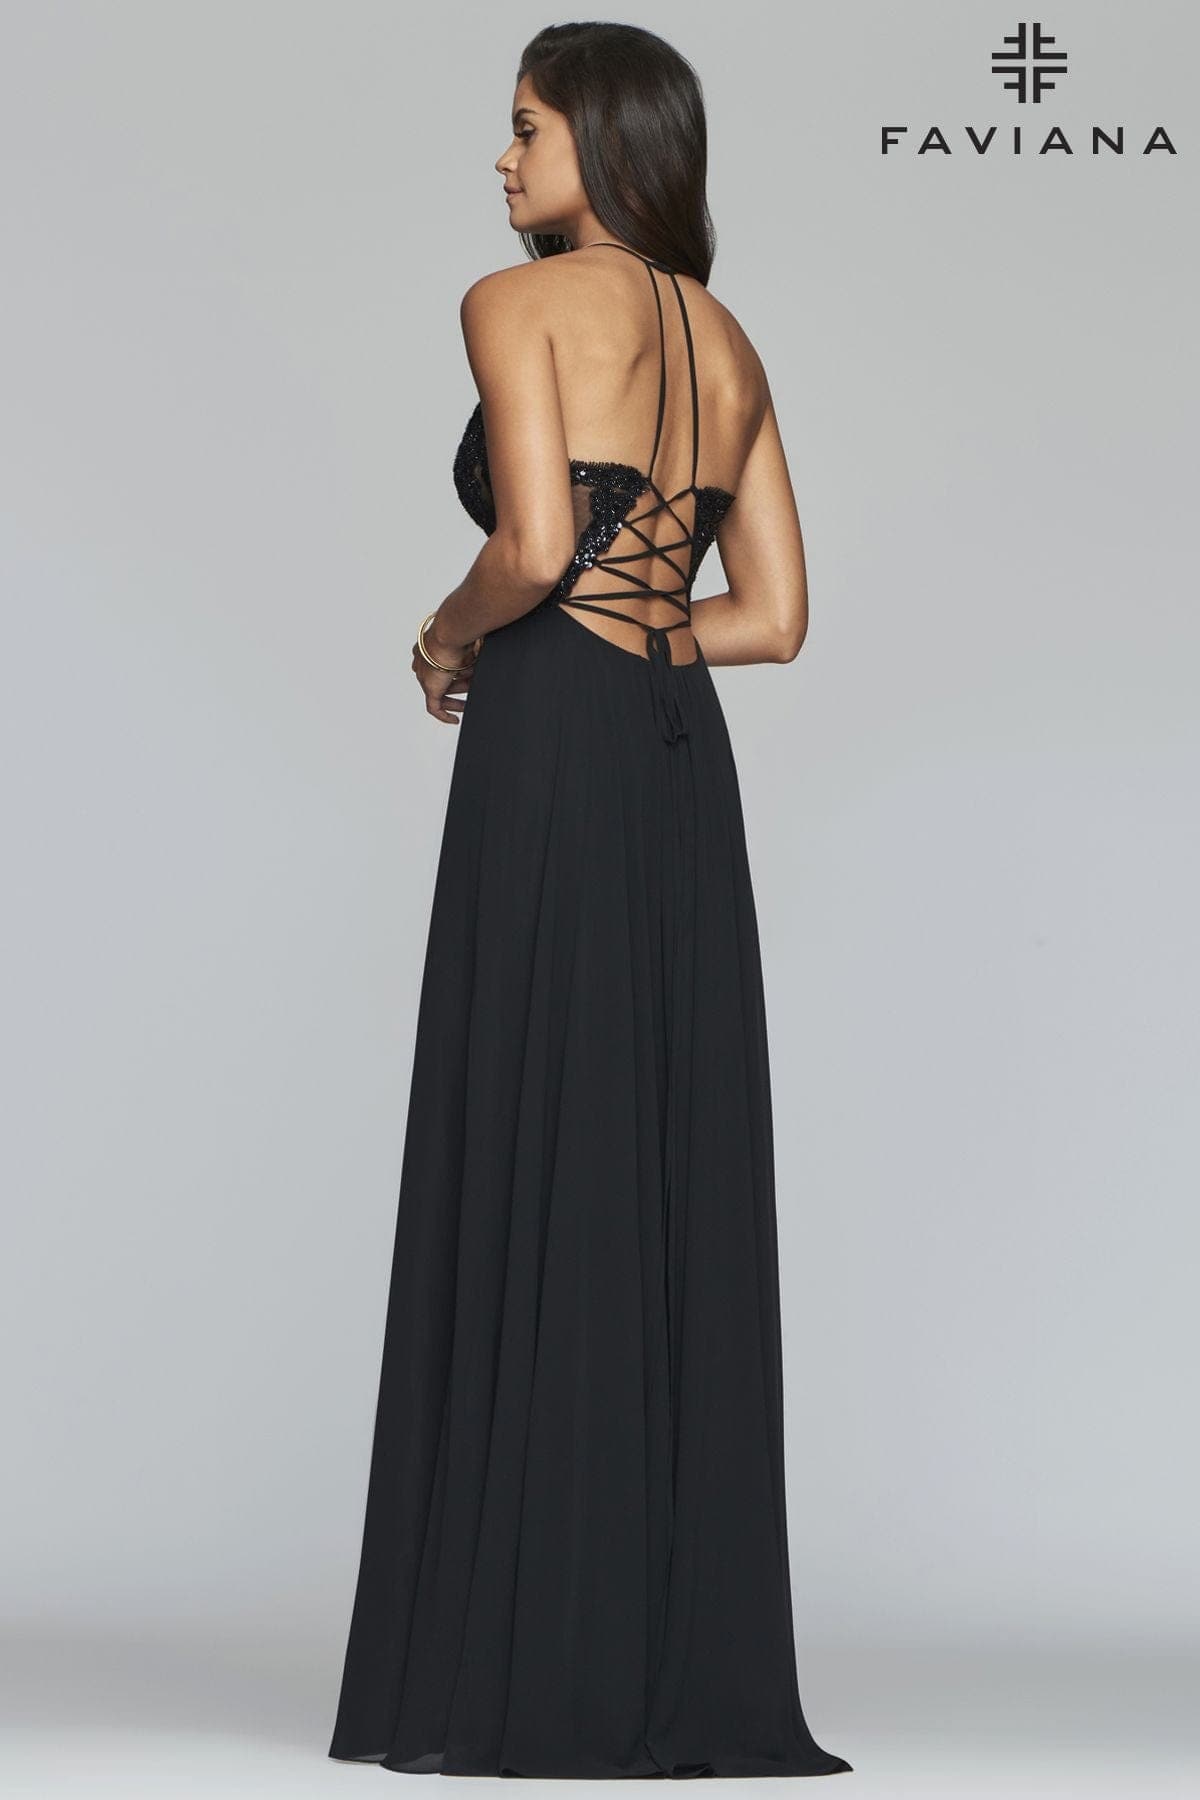 V Neck Long Chiffon Dress With Beaded Lace Applique Bodice